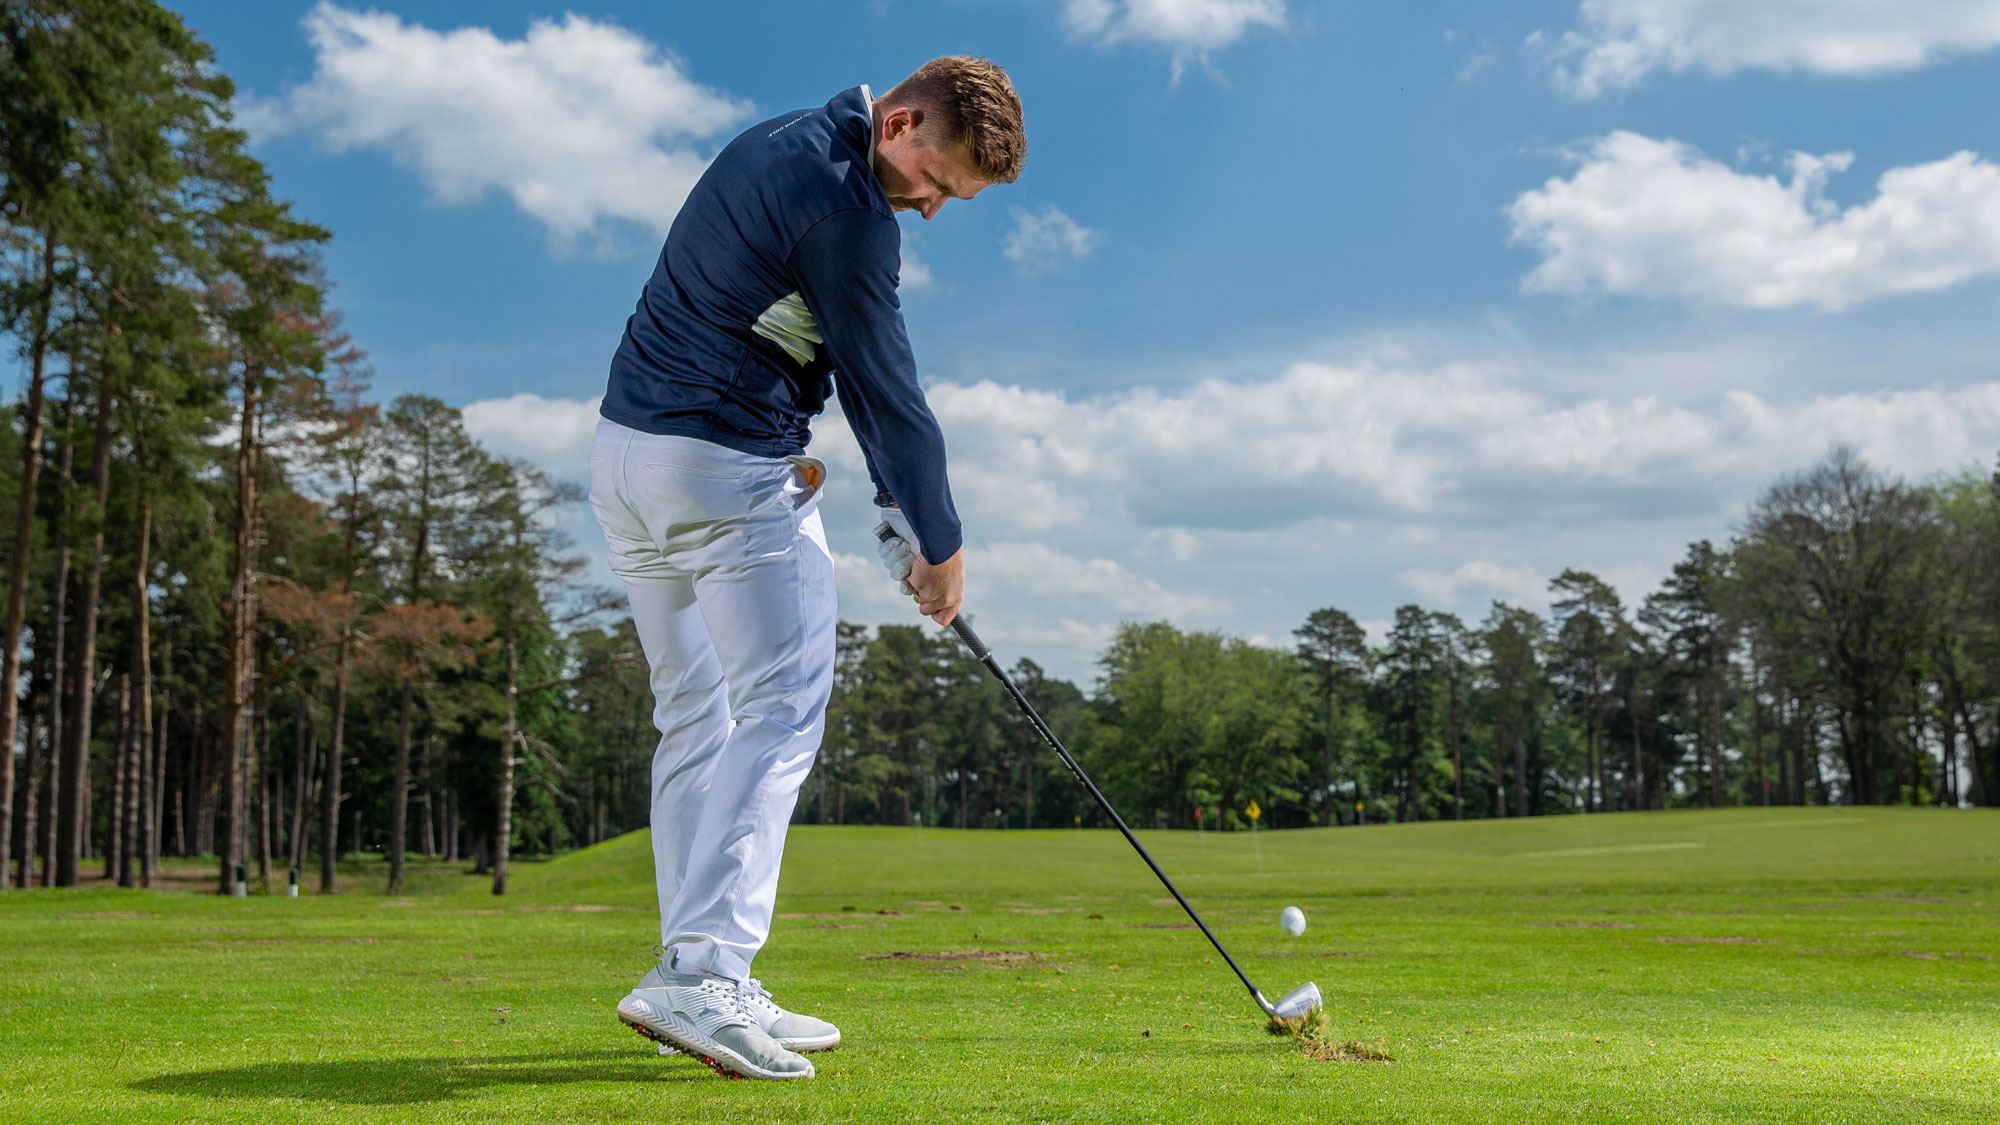 How To Swing A Golf Club | Golf Monthly